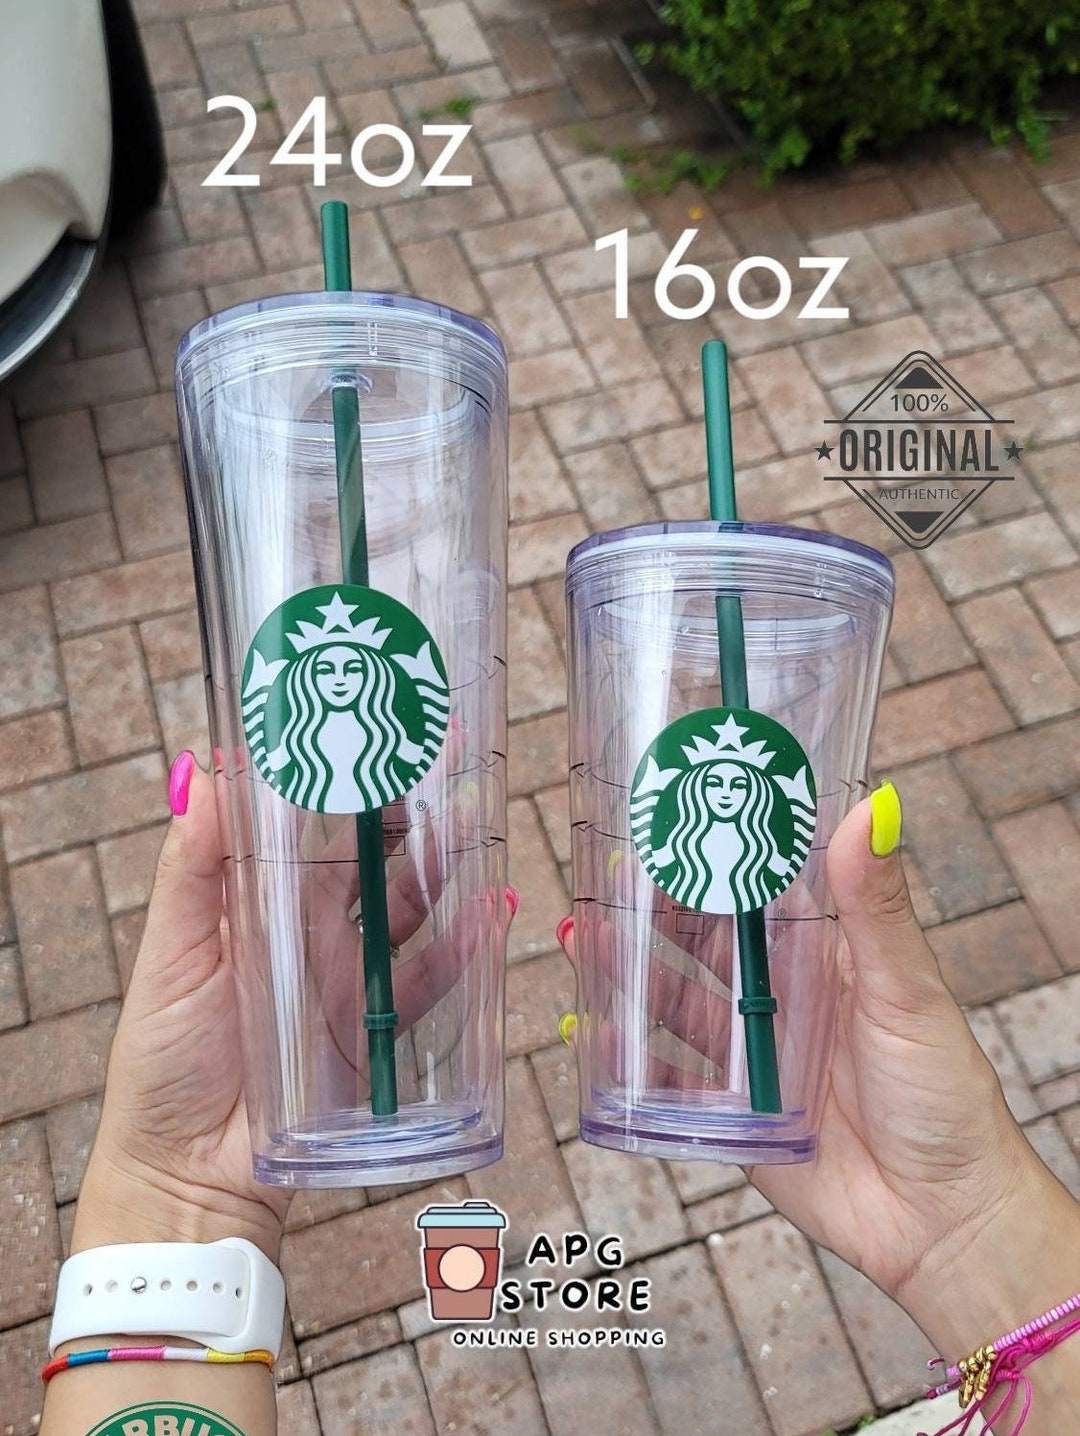 16oz Clear Insulated Acrylic Tumblers with Lid & Straw, Bulk Double Wall Reusable Classic Cup, Great Plastic Tumblers for Cold Drinks, Coffee